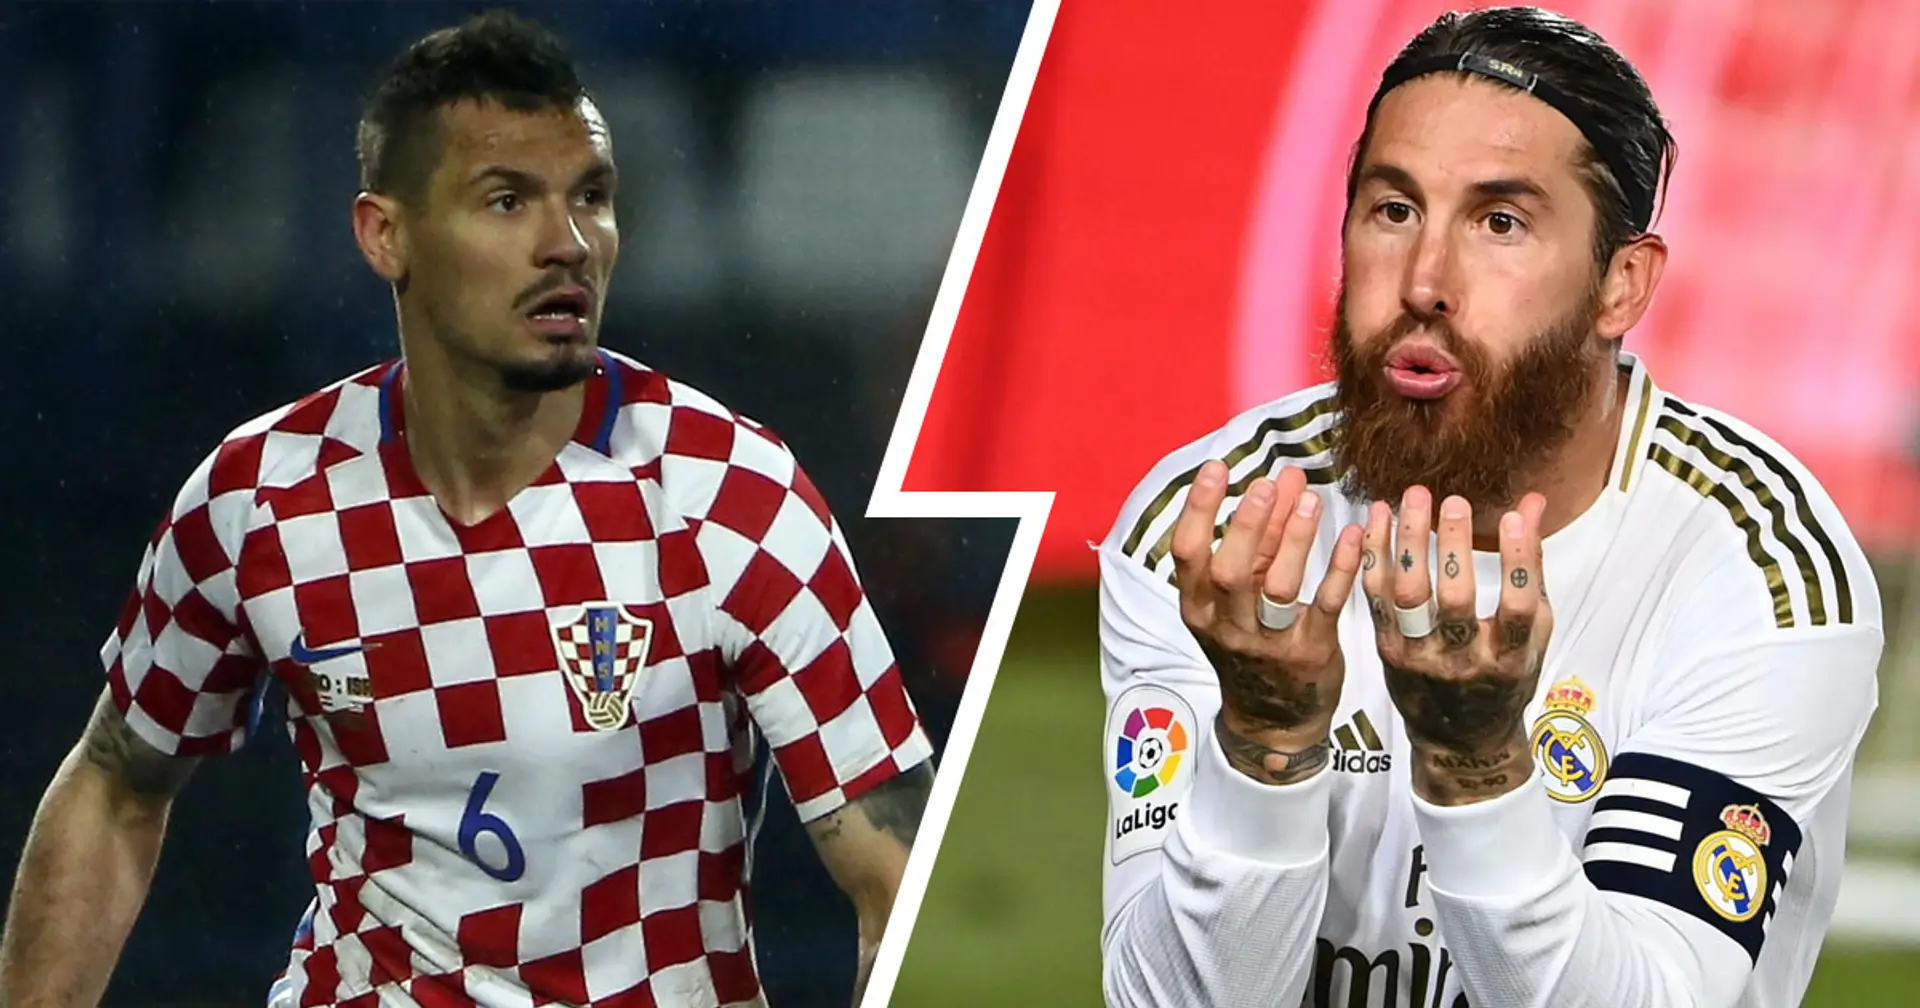 Ex-Liverpool defender Dejan Lovren reveals reason behind going after Ramos during Nations League game in 2018